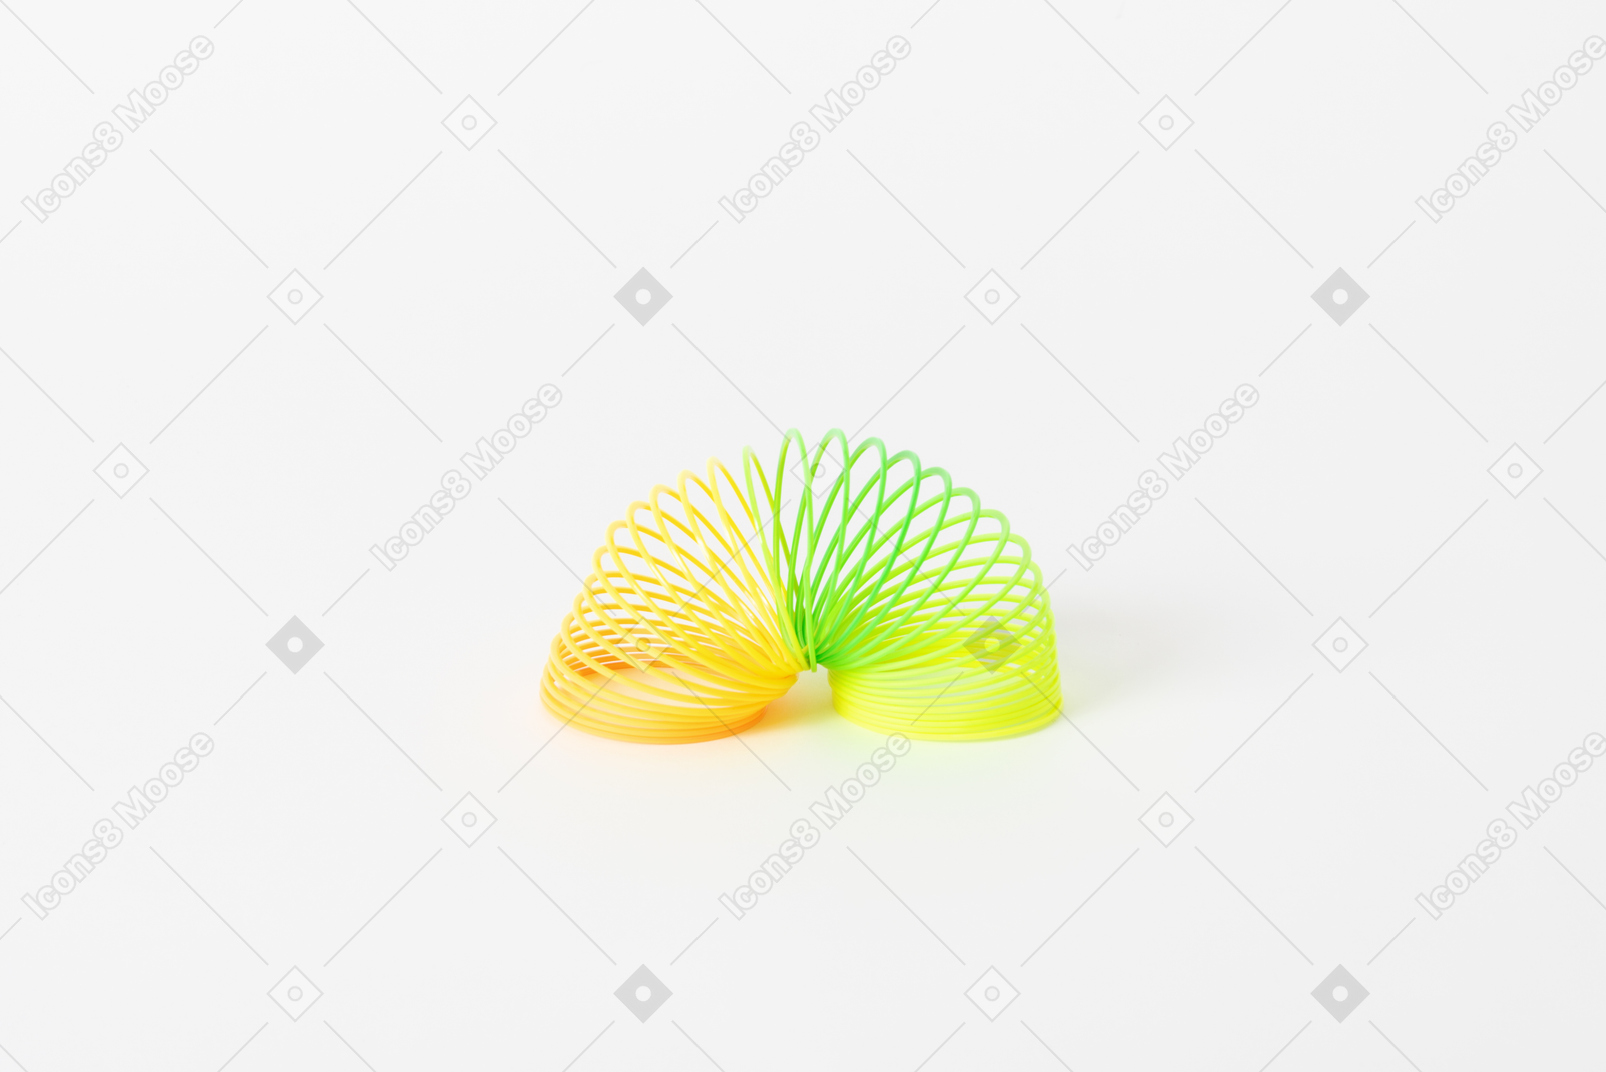 Colorful slinky toy